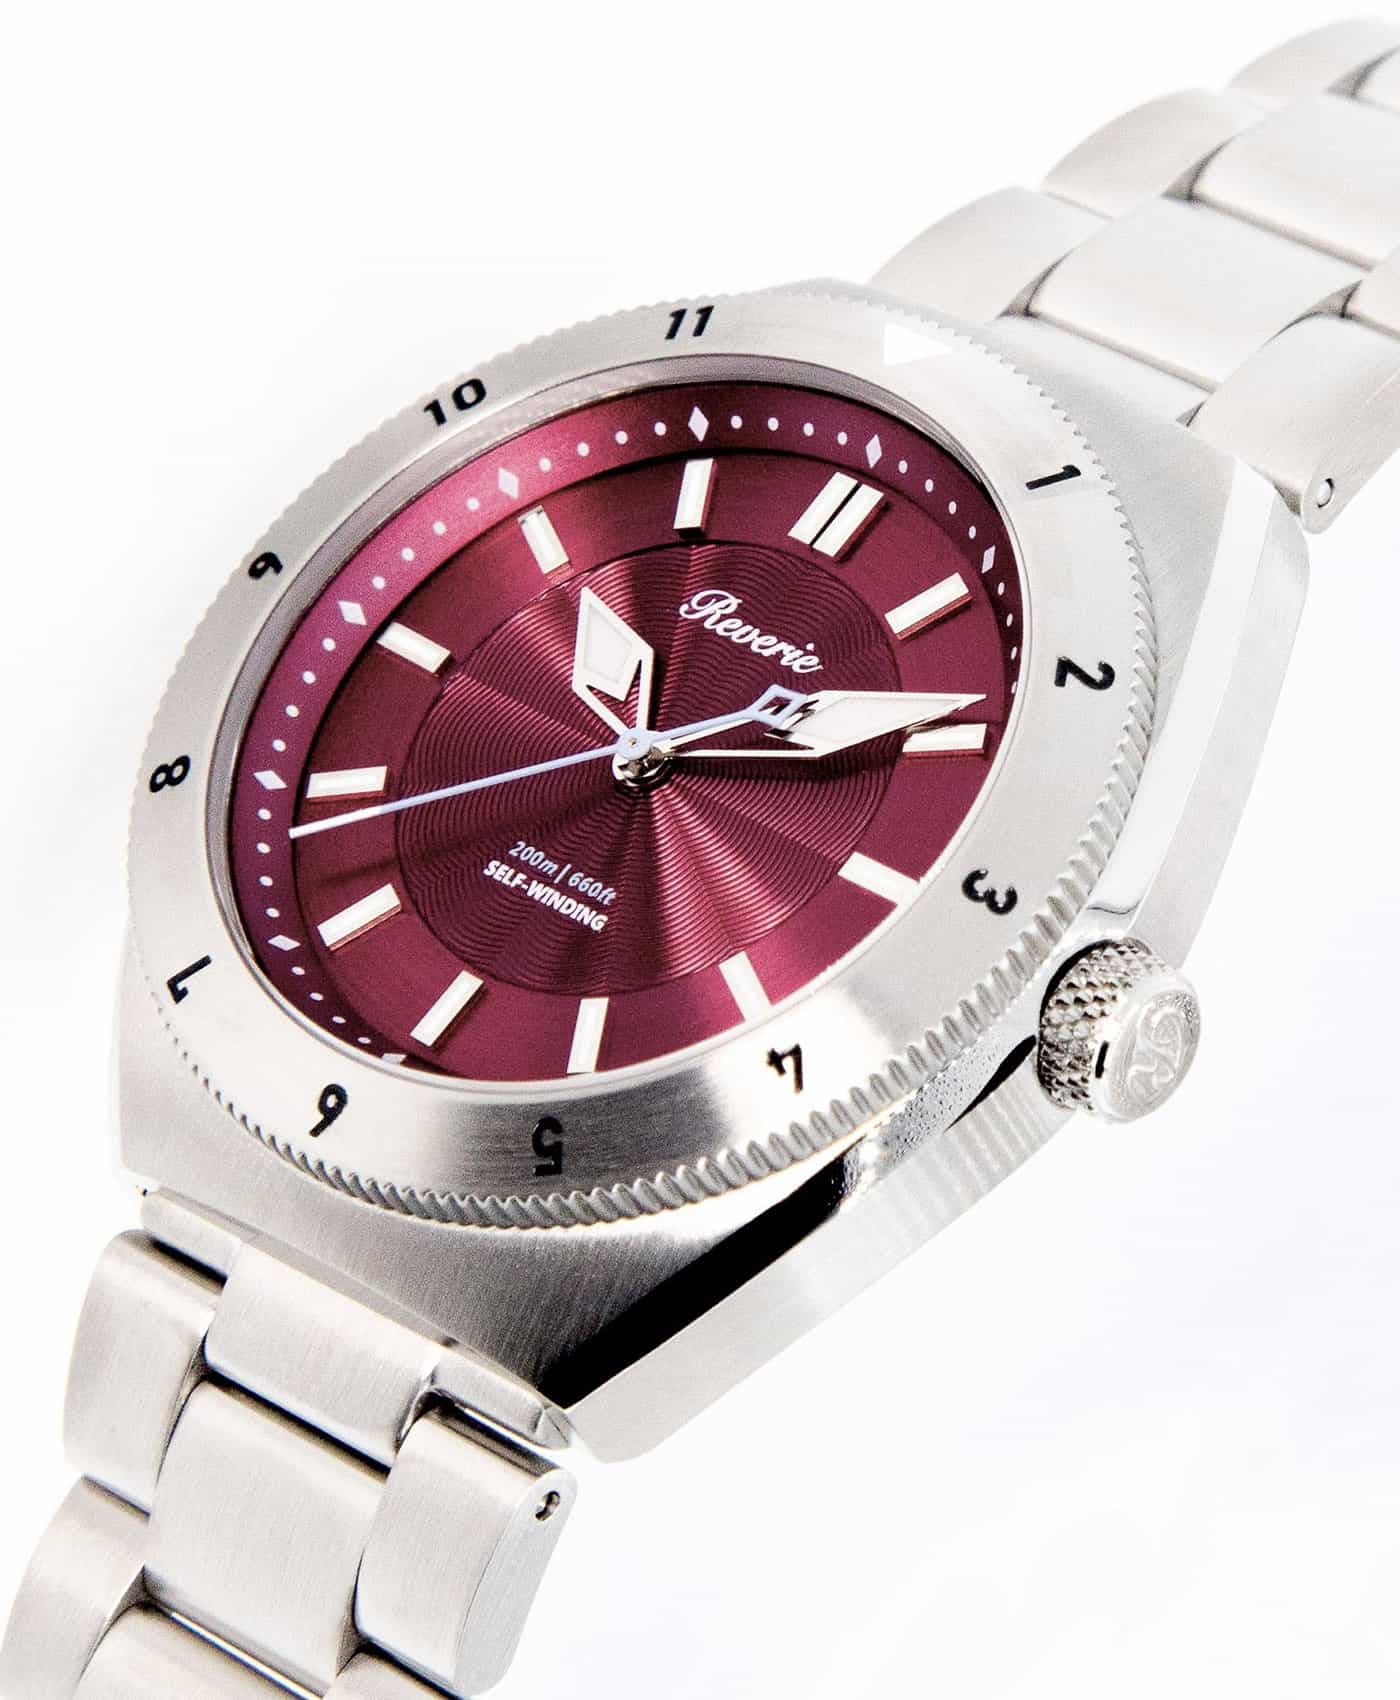 Reviere Diver Red-12h bezel